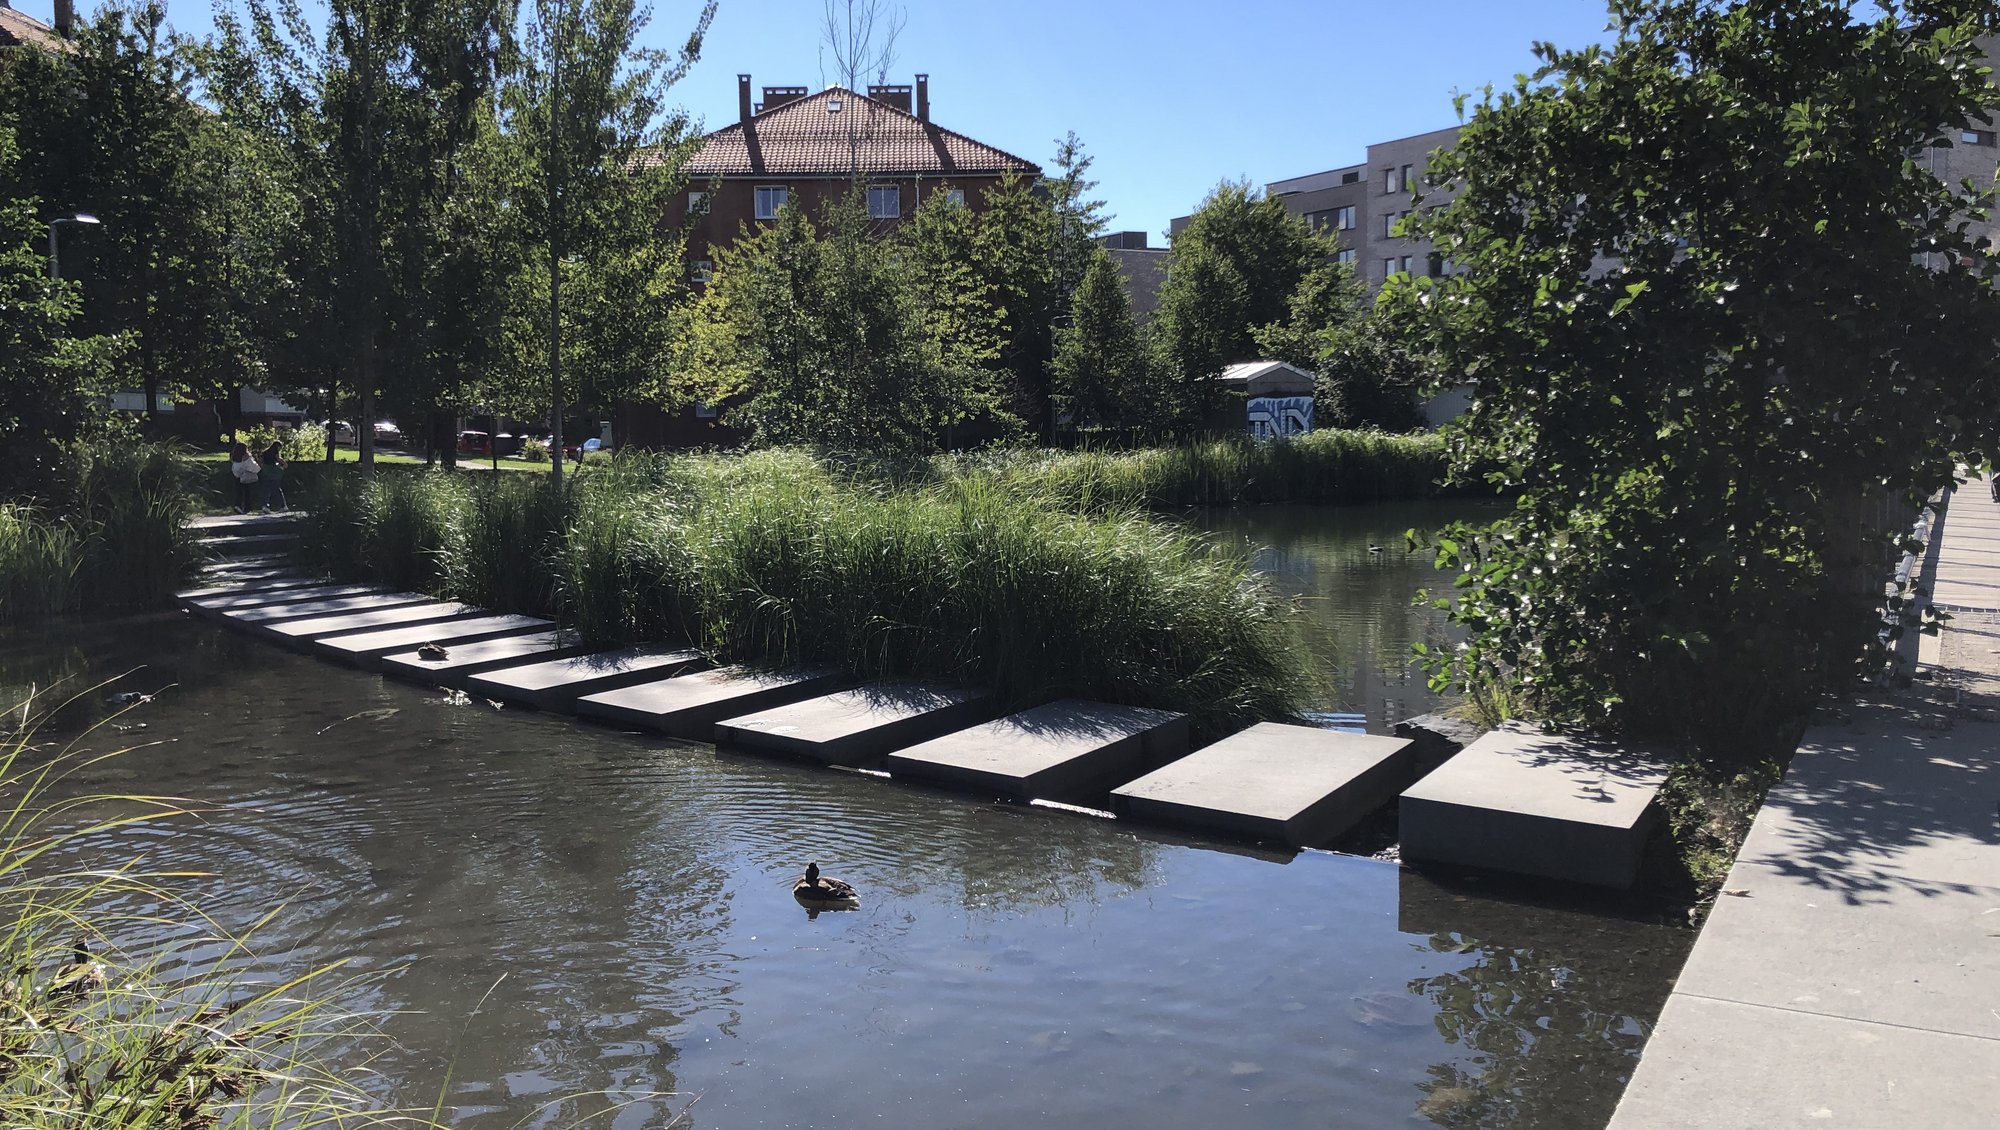 A stone bridge crosses a stream of water in an urban setting in Oslo city. A small duck is laying on one of the stones, and a bigger duck swimming besides the bridge. Around the bridge are many trees and behind the trees, several houses can be seen.